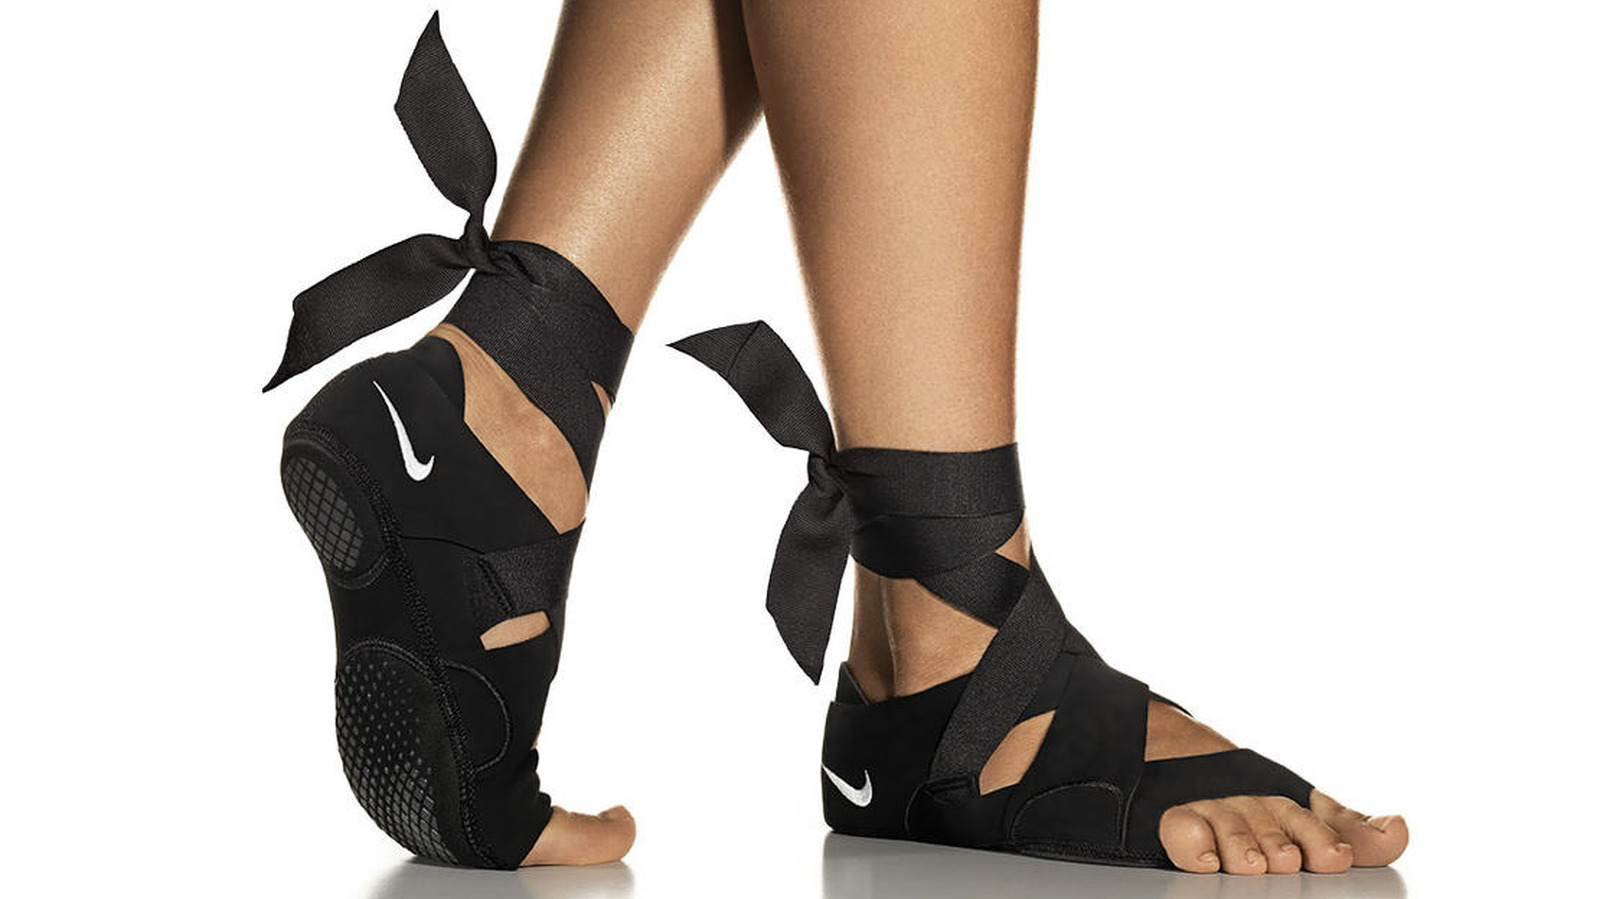 https://www.thelist.com/img/gallery/are-nike-yoga-wrap-shoes-worth-it/l-intro-1640792028.jpg